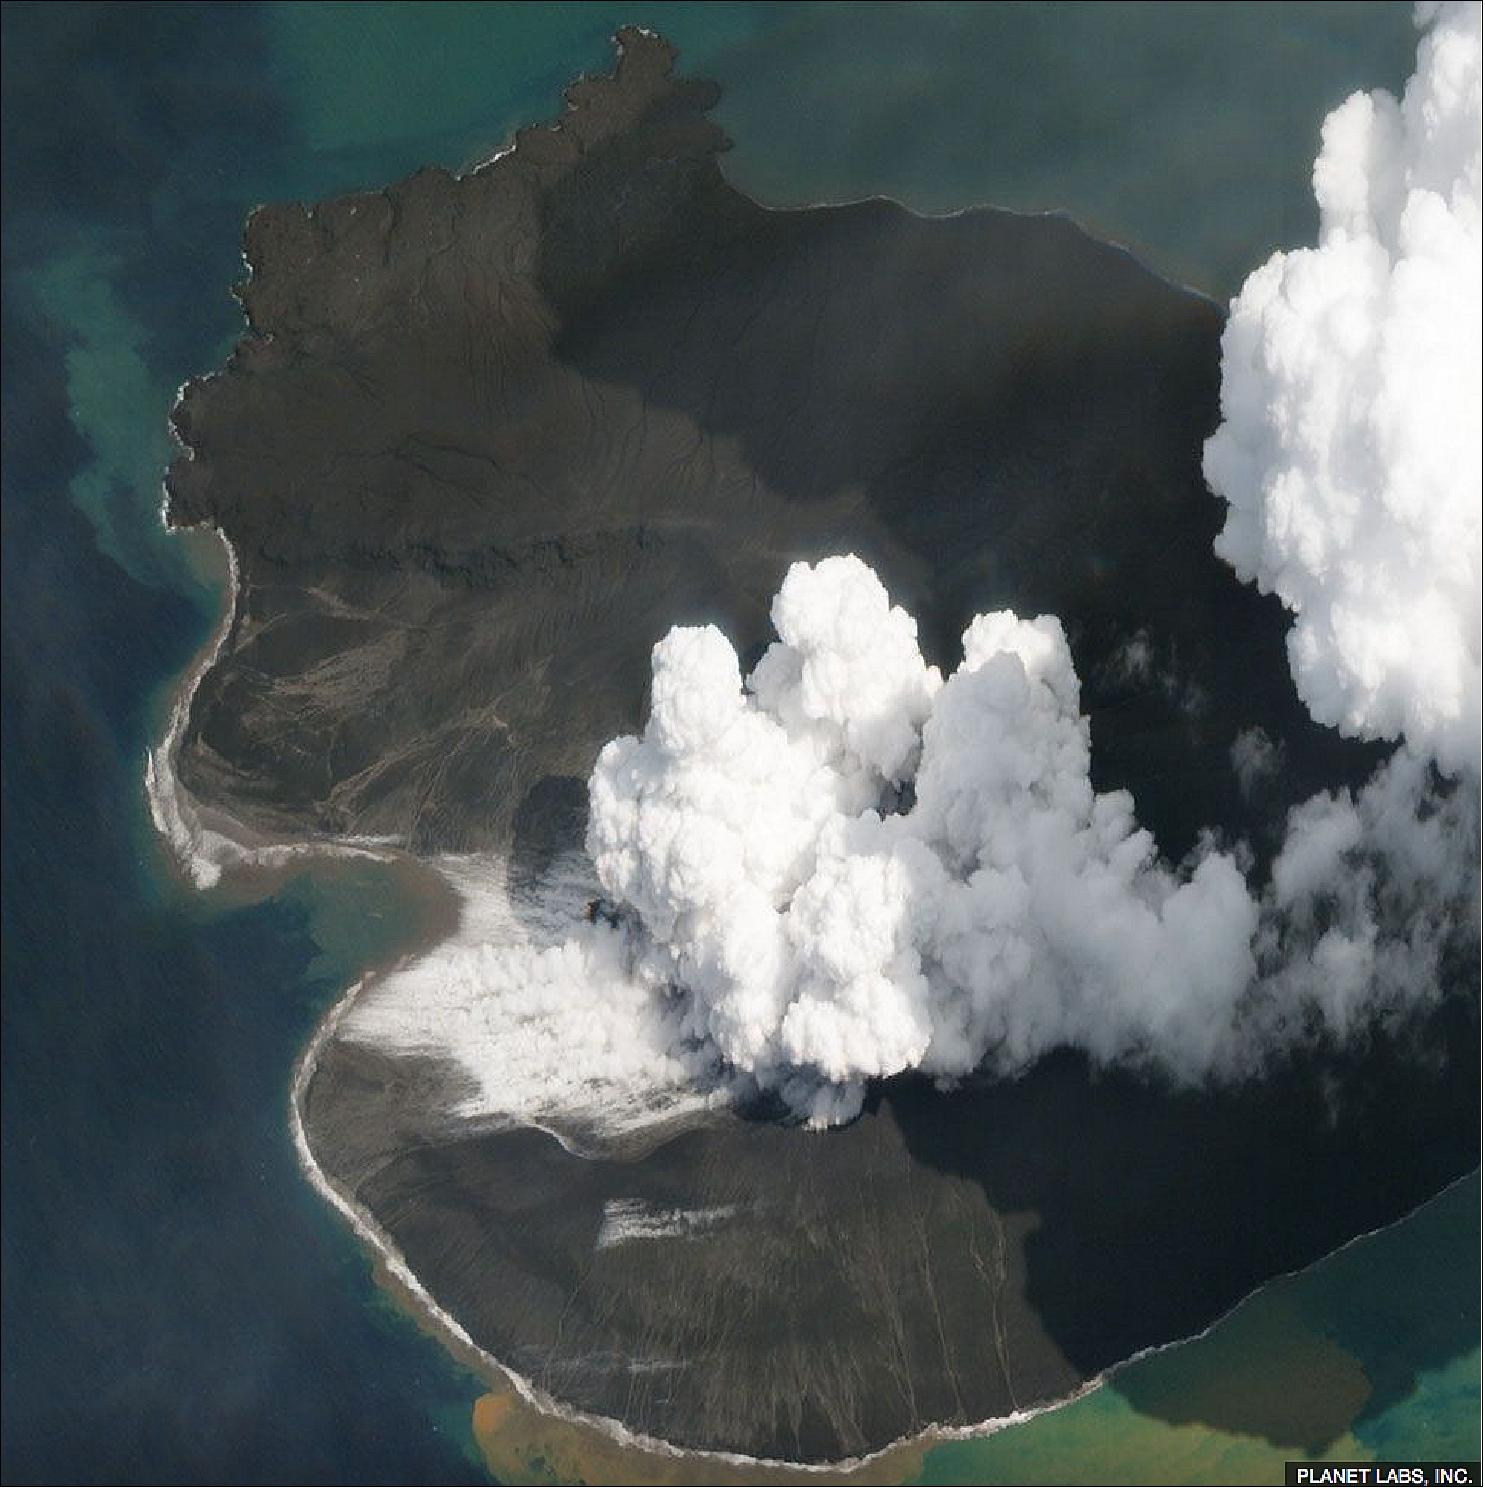 Figure 26: Image of Anak Krakatau as acquired on 2 January 2019 by Planet's SkySat satellite constellation (image credit: Planet Labs Inc.)